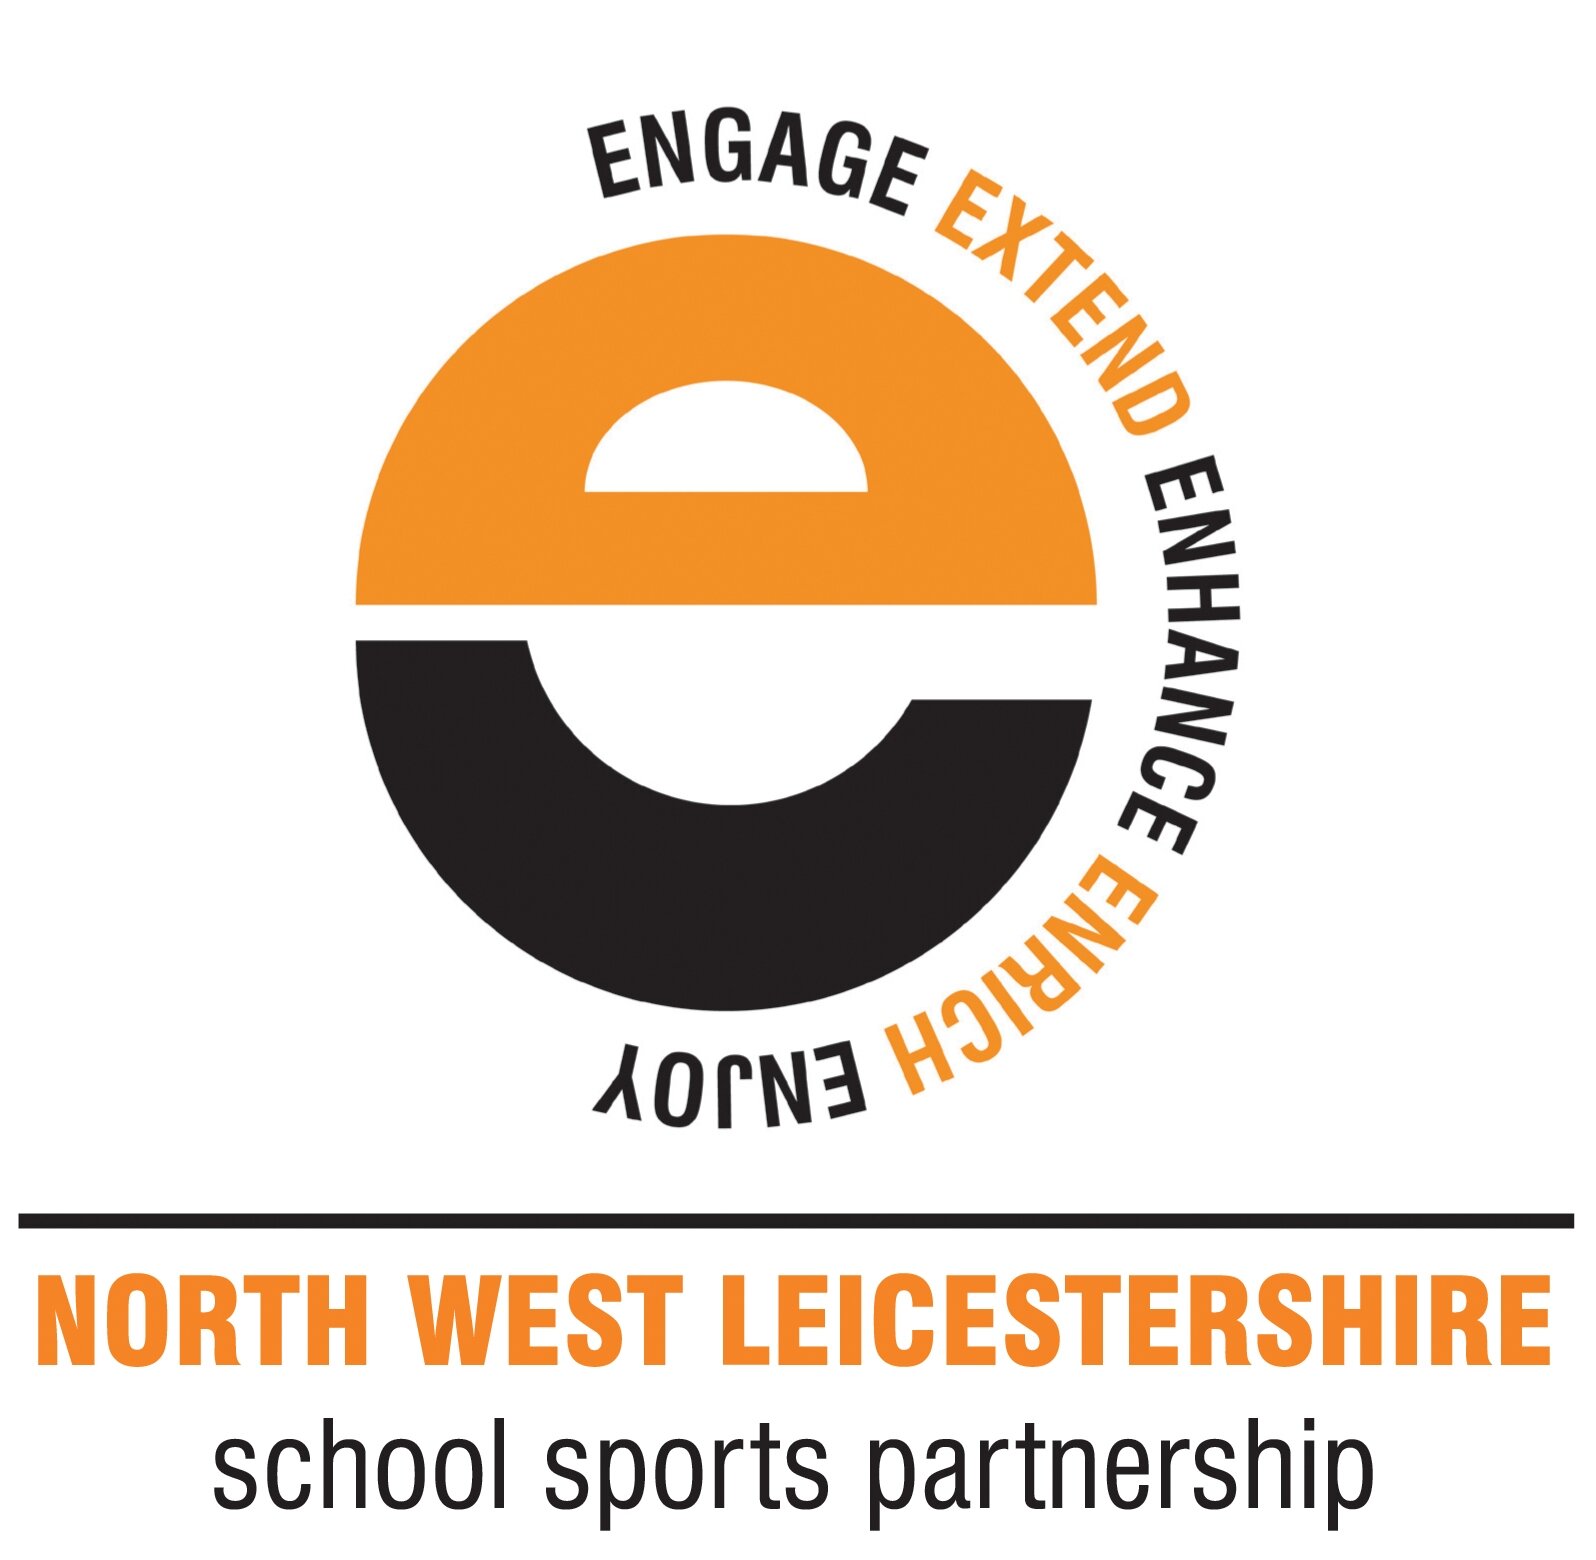 Our vision is to: Engage all, Extend provision, Enhance participation, Enrich experience & provide Enjoyment and fun for students in North West Leicestershire.